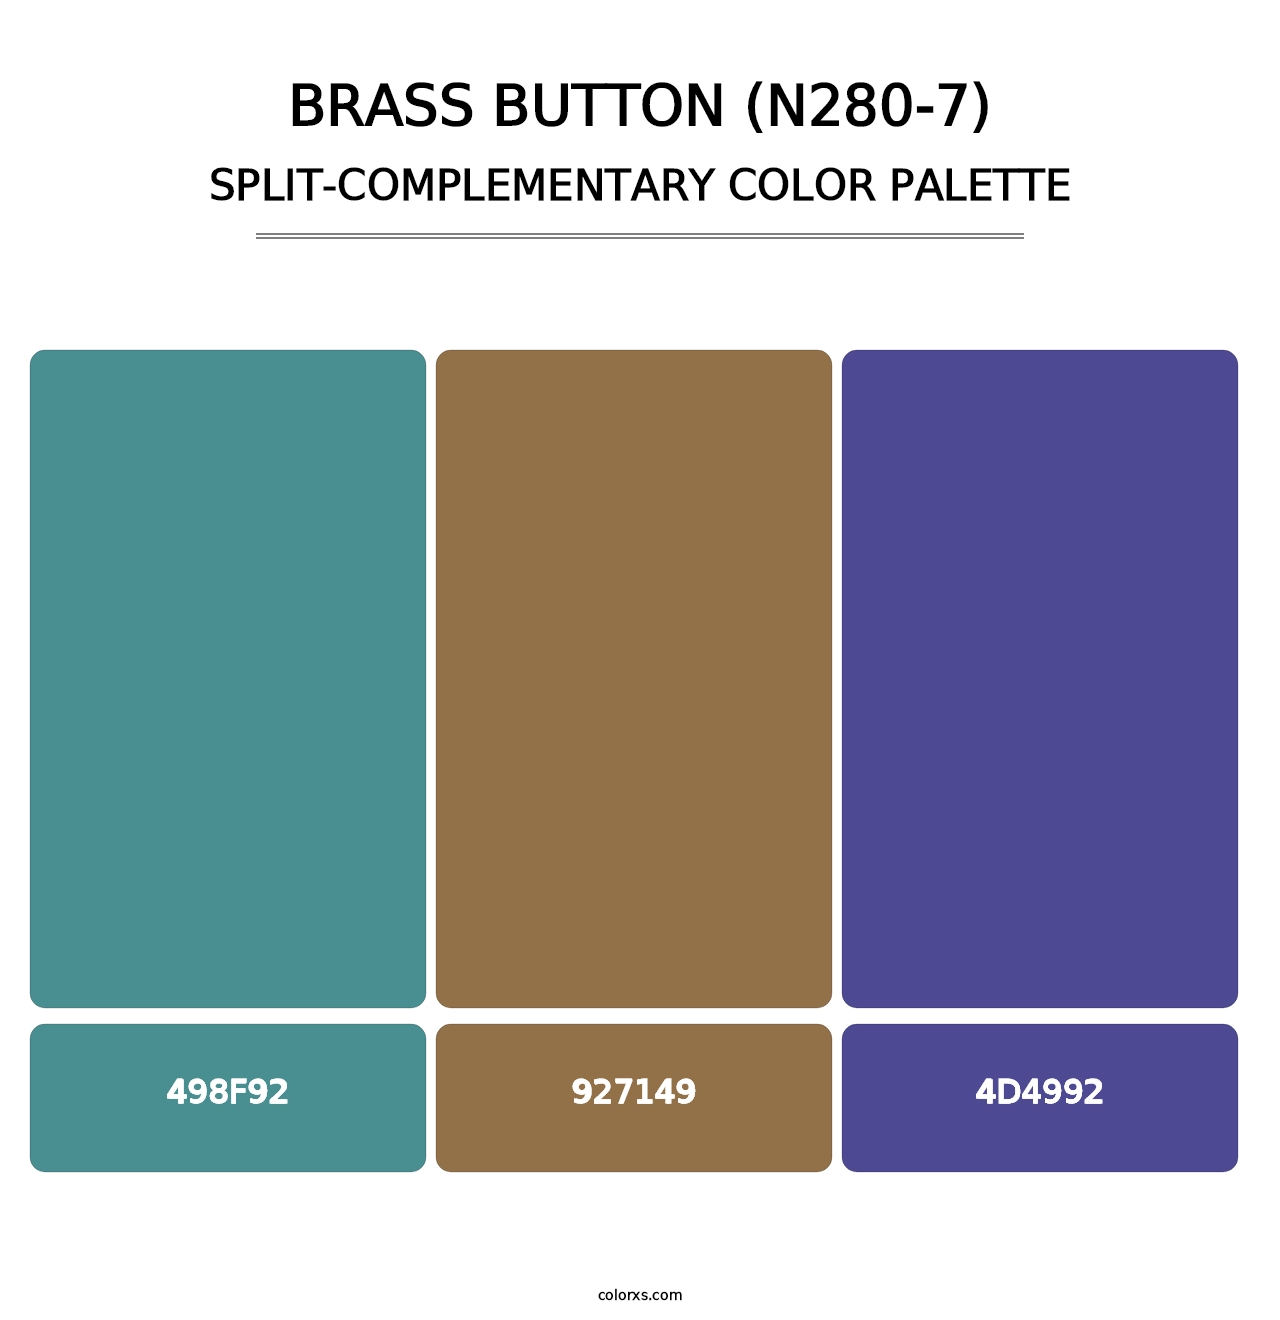 Brass Button (N280-7) - Split-Complementary Color Palette